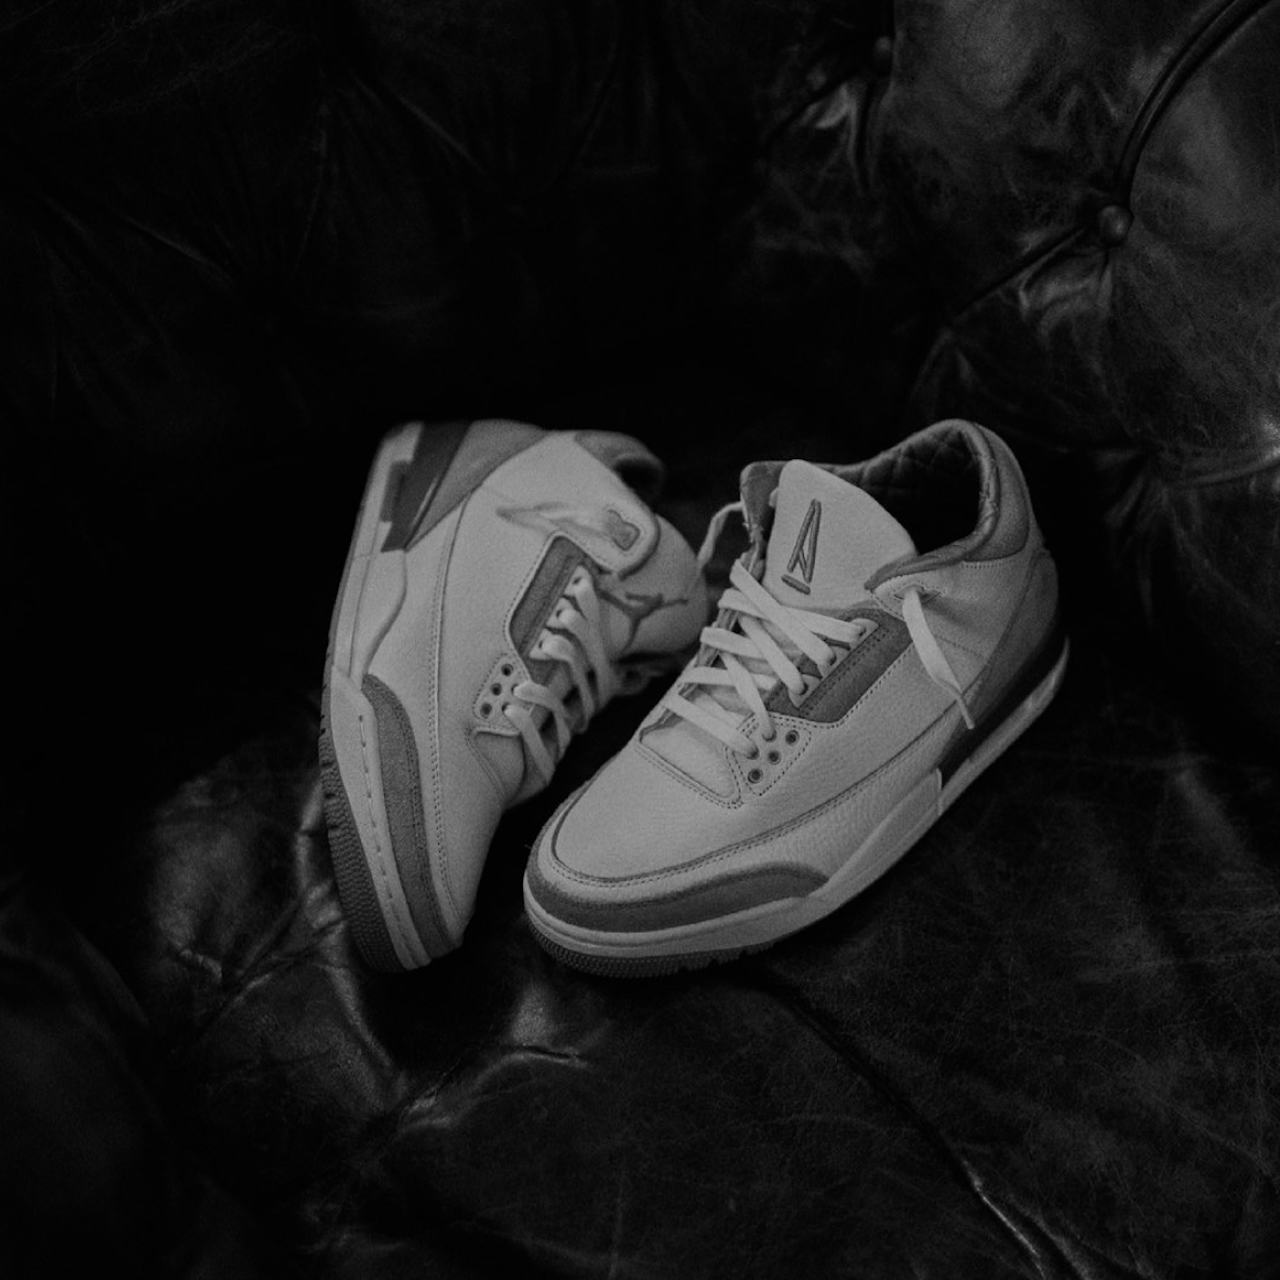 Nike’s luxury ‘A Ma Maniére’ Air Jordan 3 sneaker has been delayed